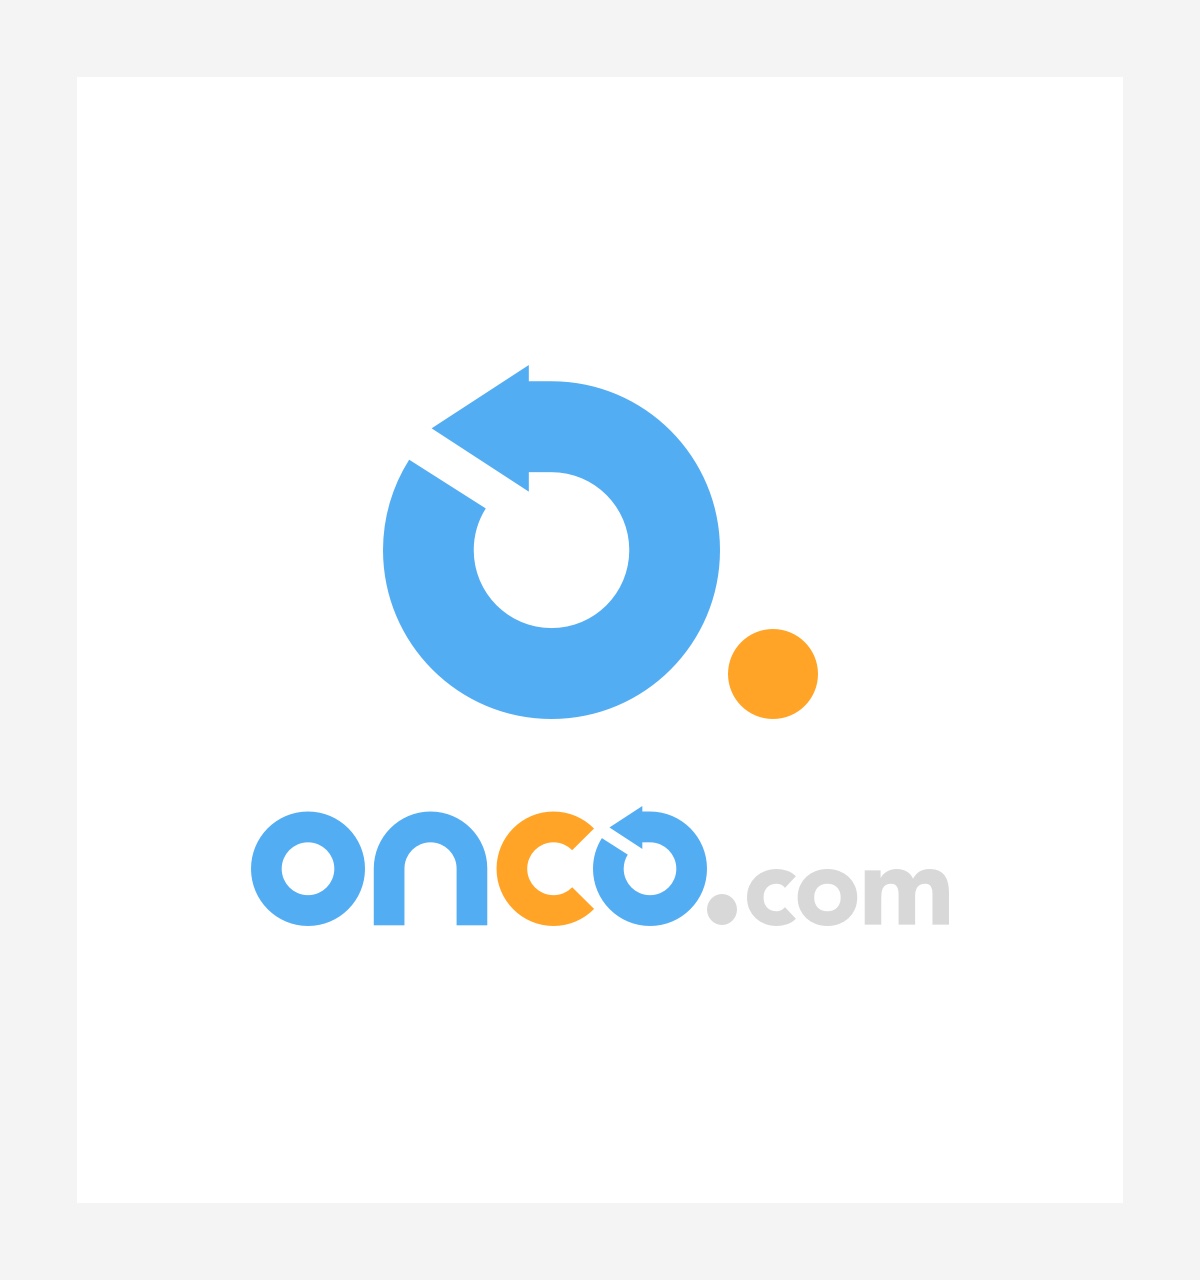 onco-com-introduces-a-teleconsultation-service-to-help-cancer-patients-get-advice-remotely-from-oncologists